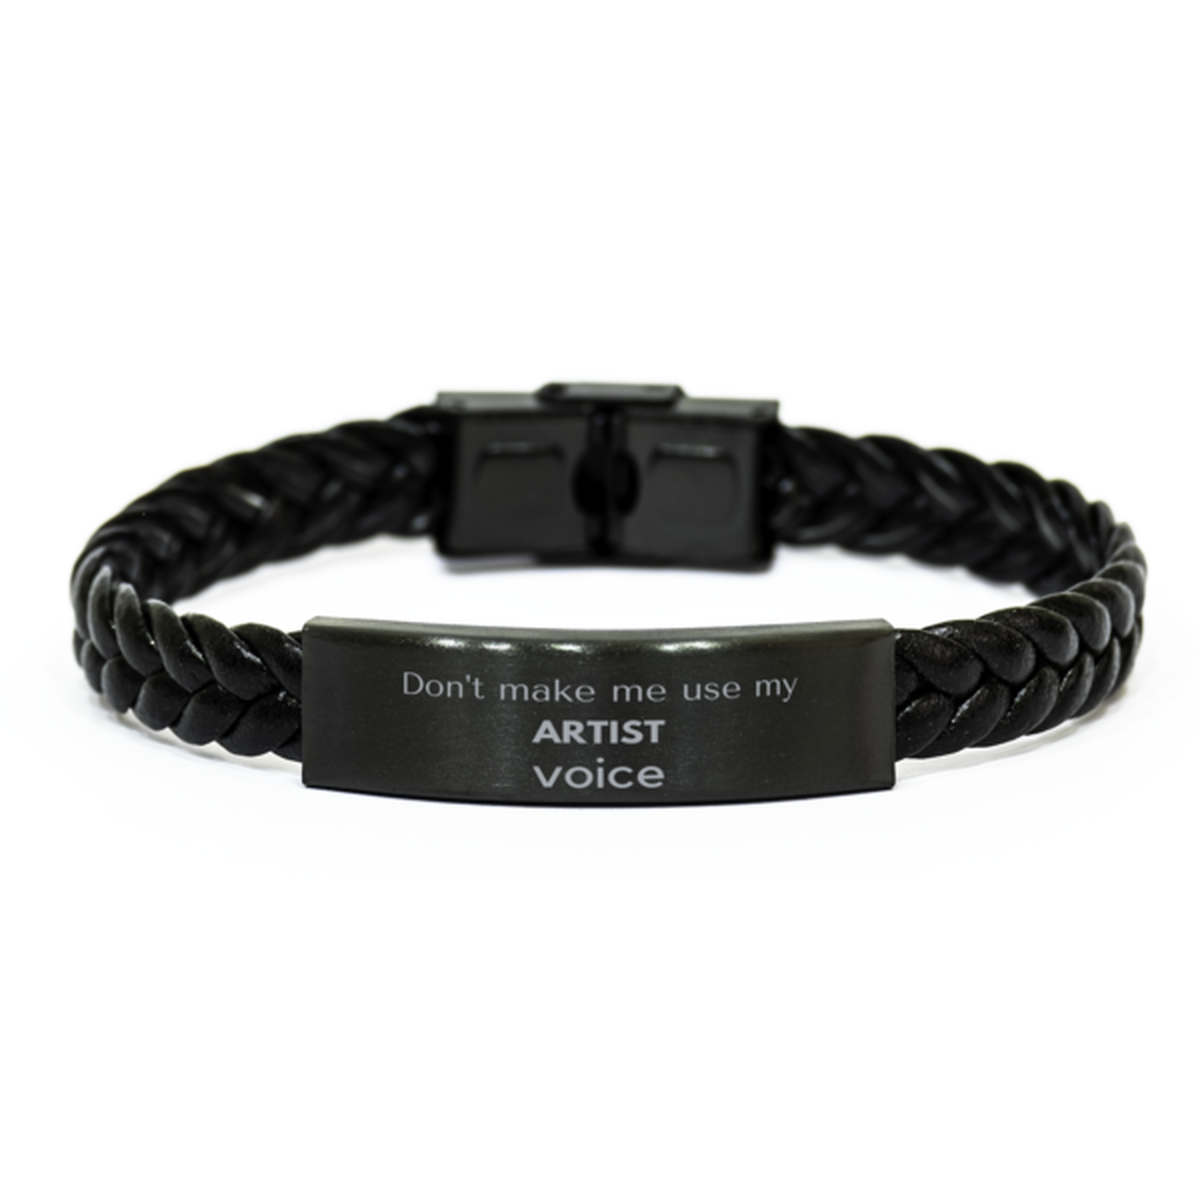 Don't make me use my Artist voice, Sarcasm Artist Gifts, Christmas Artist Braided Leather Bracelet Birthday Unique Gifts For Artist Coworkers, Men, Women, Colleague, Friends